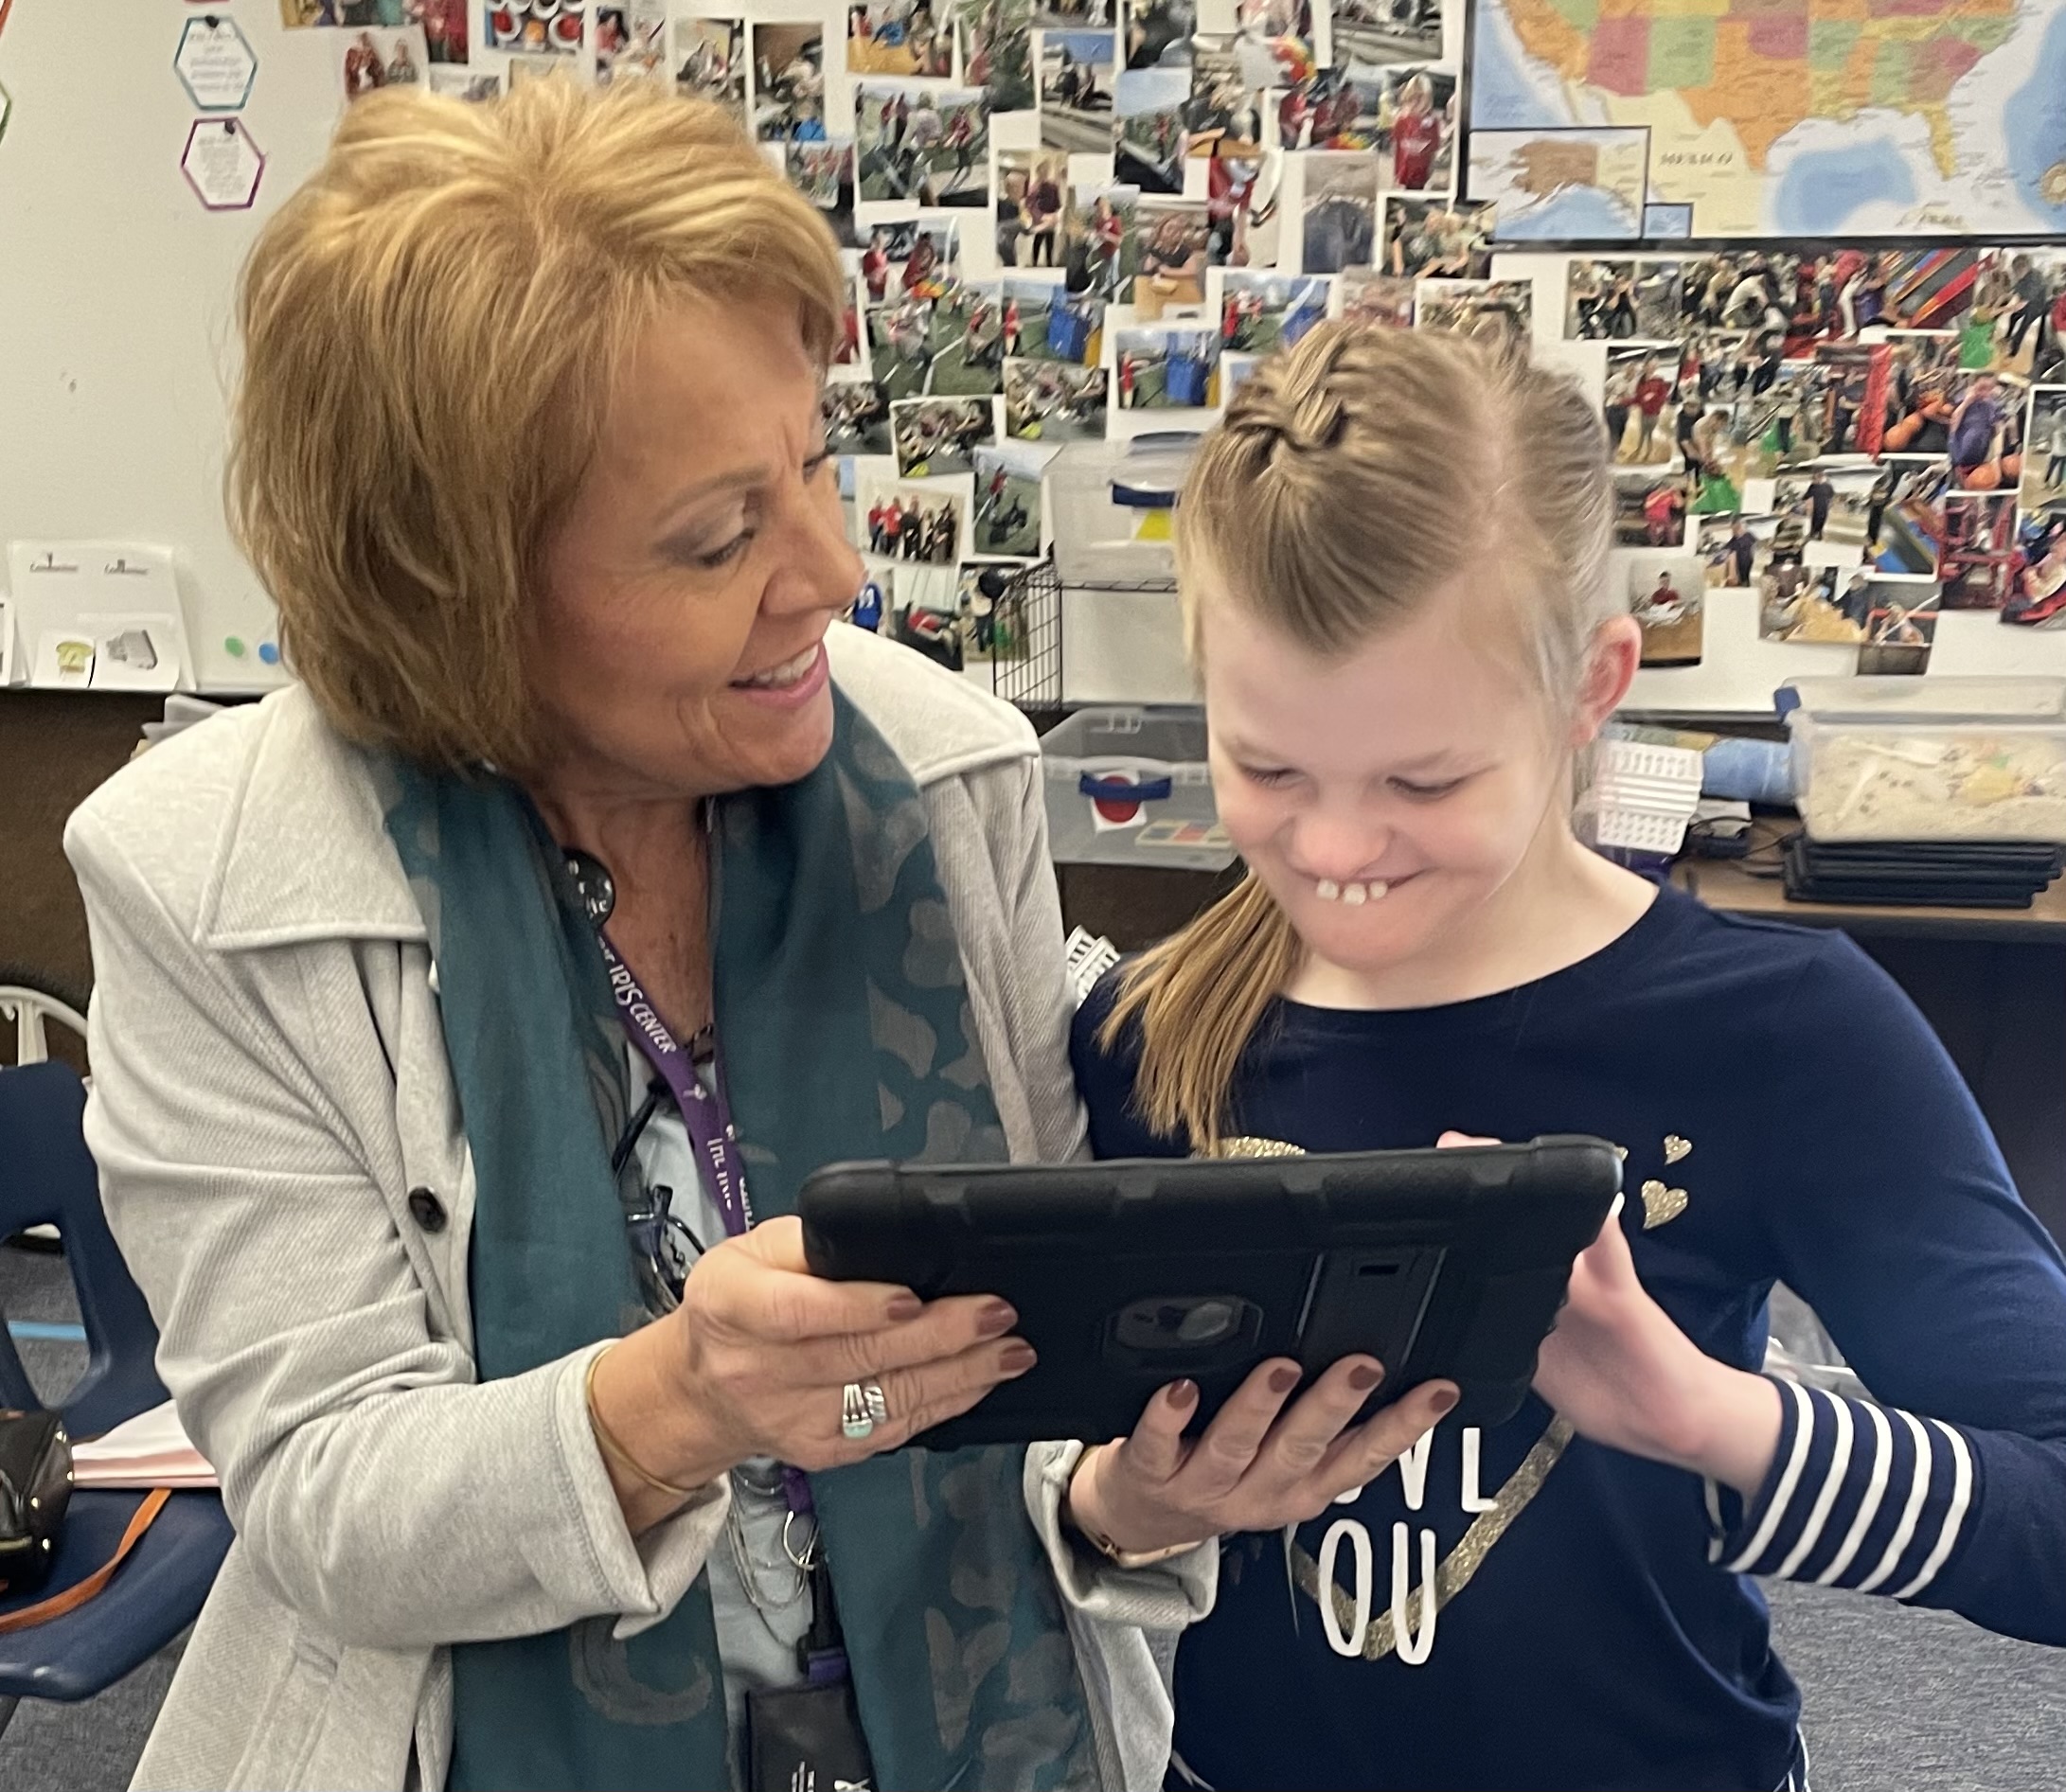 A teacher and a girl look at an electronic tablet together.